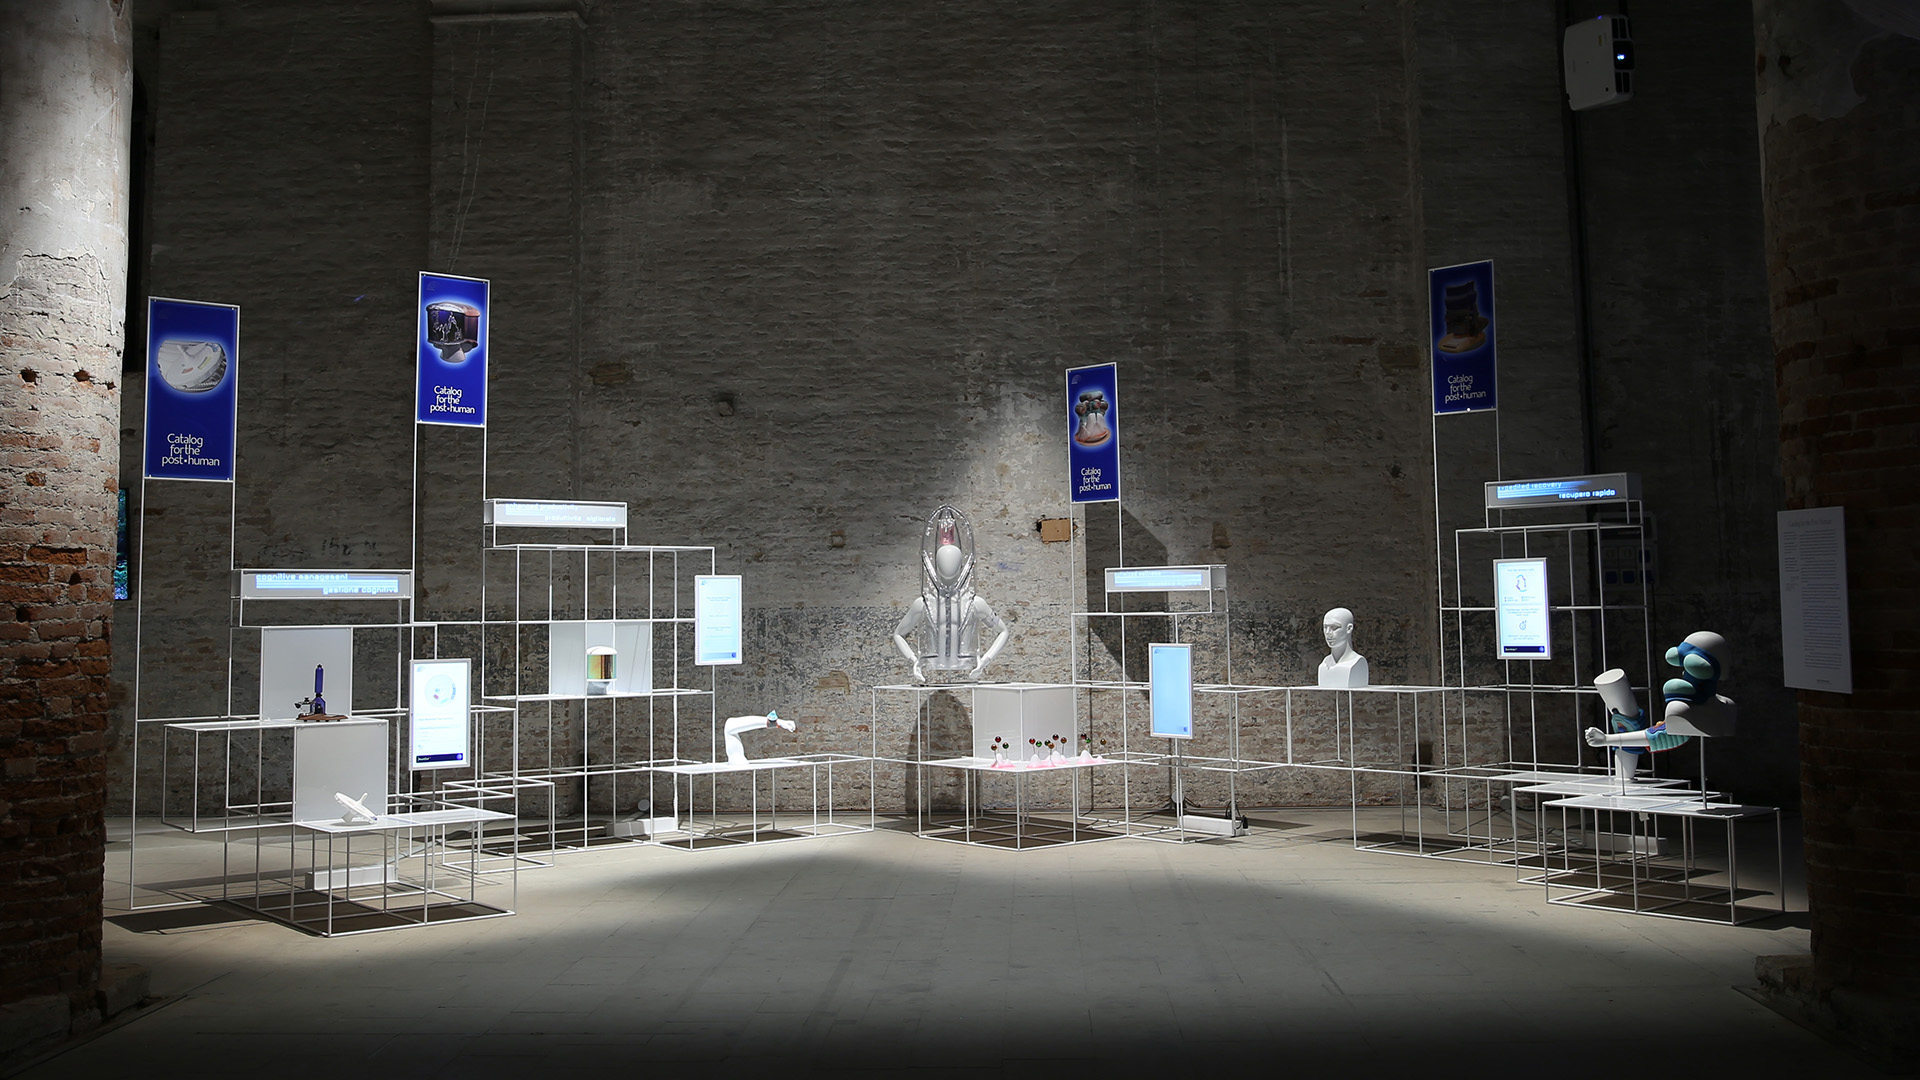 Parsons & Charlesworth’s “Catalog for the Post-Human” at the 2021 Venice Architecture Biennale